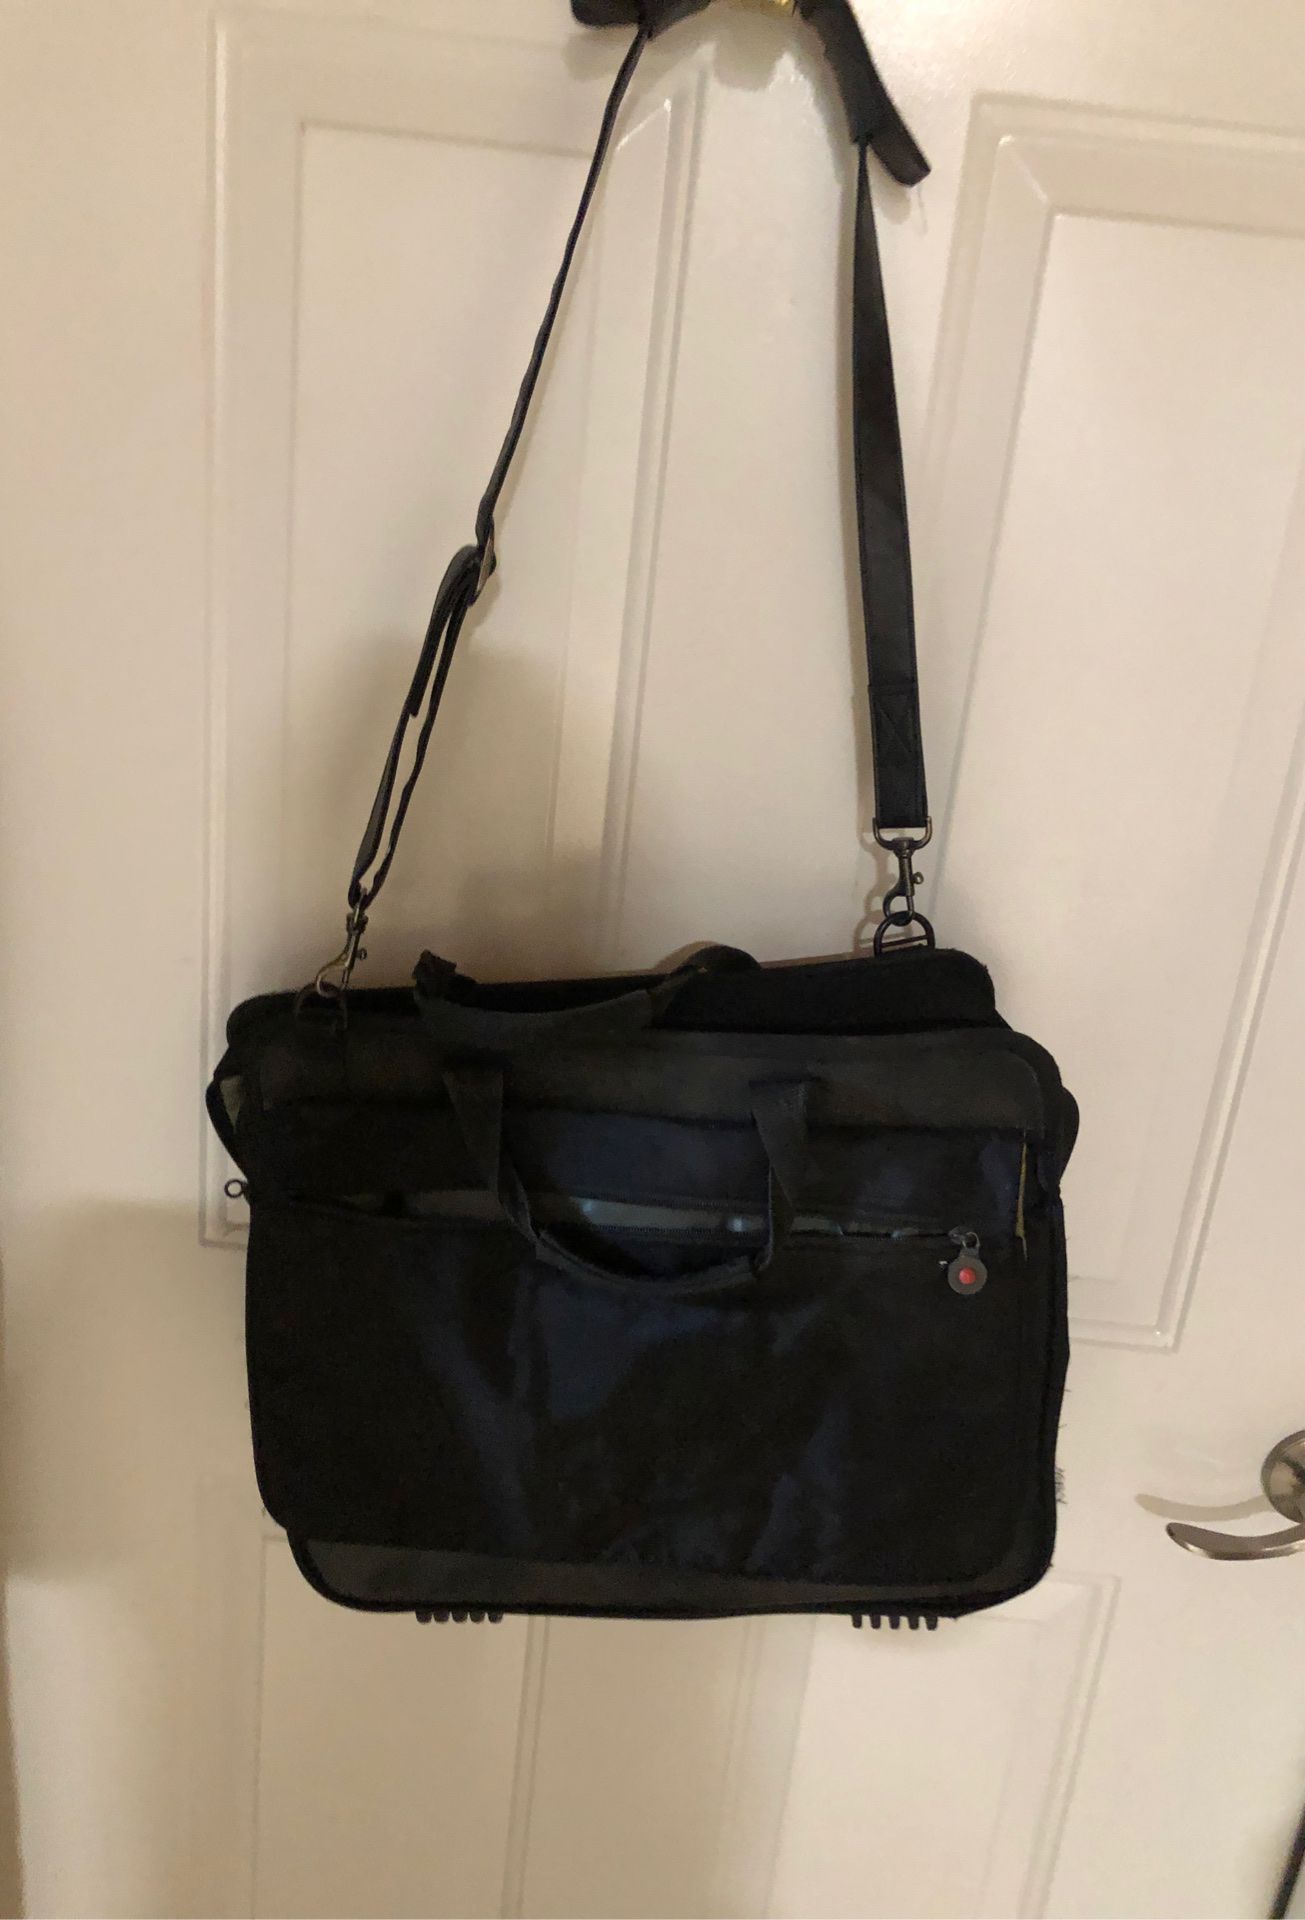 Bag for laptop/accessories